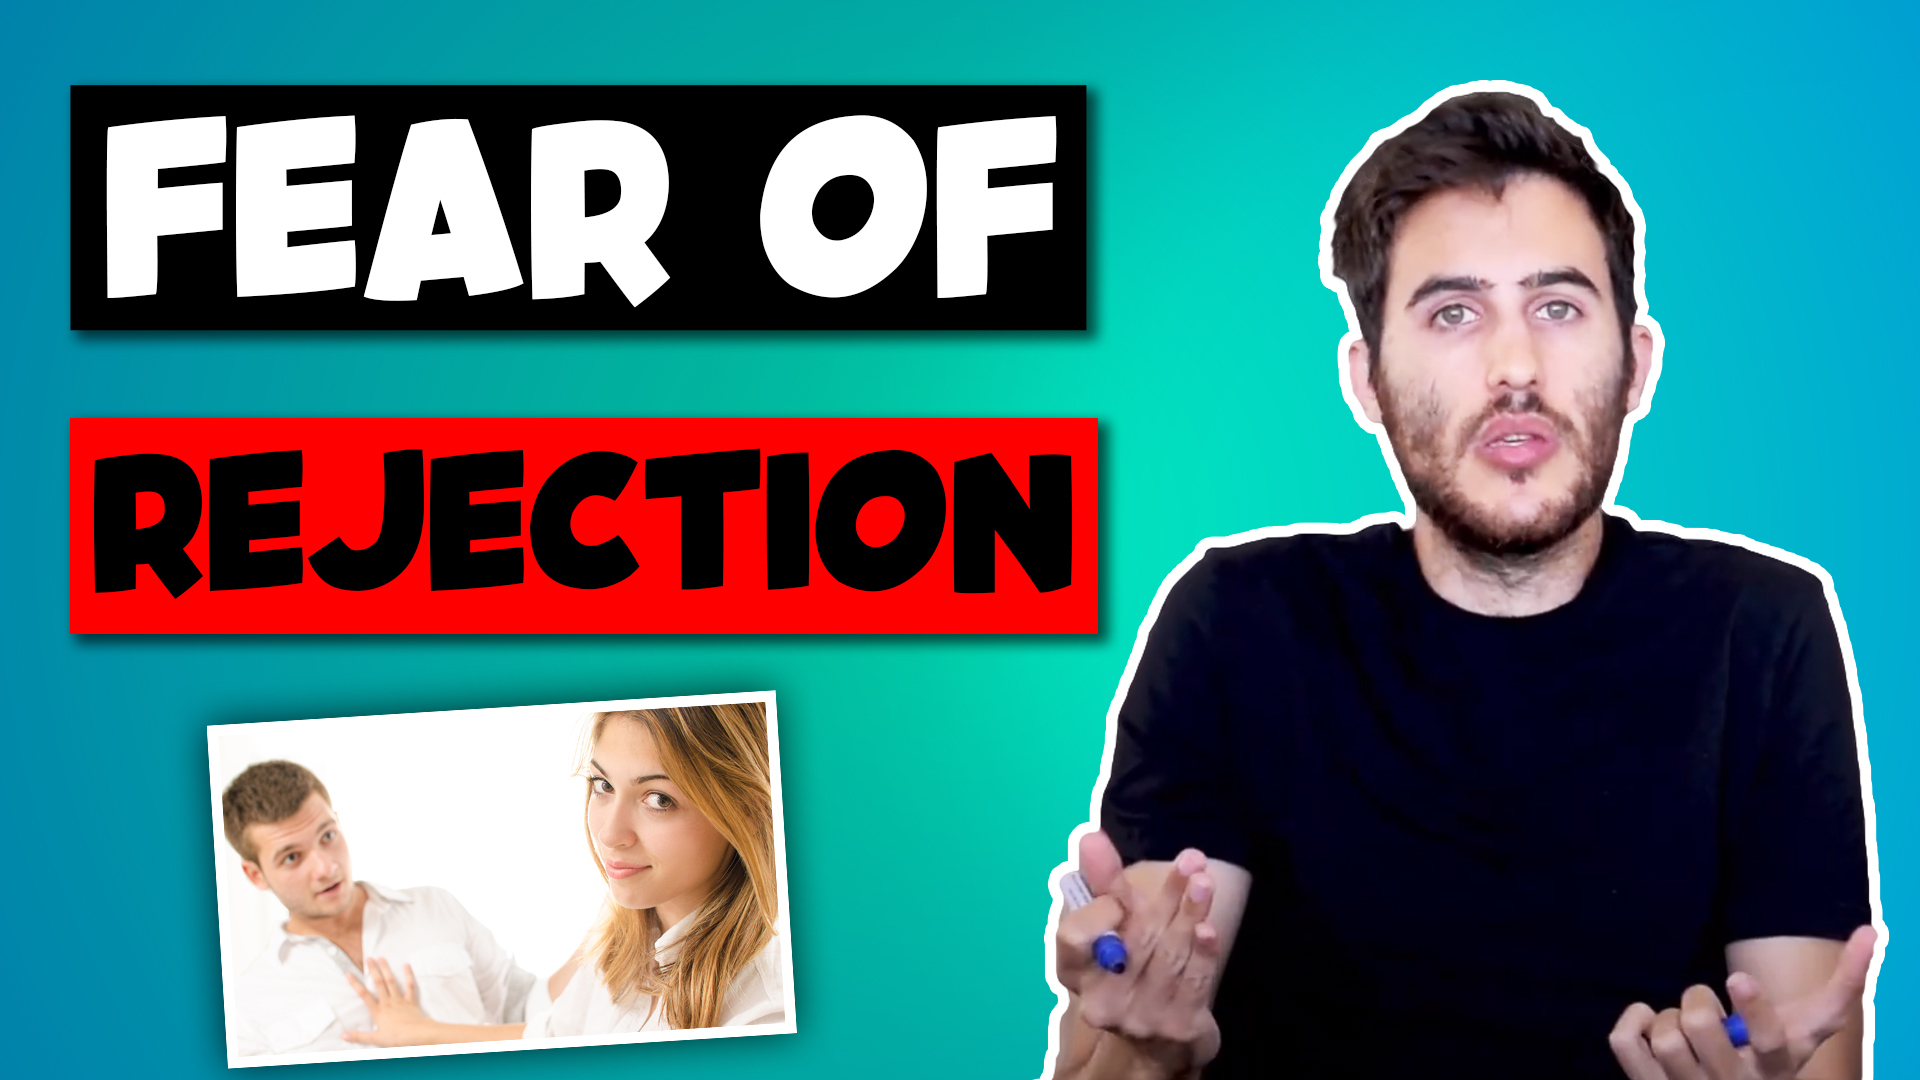 Getting over the fear of rejection